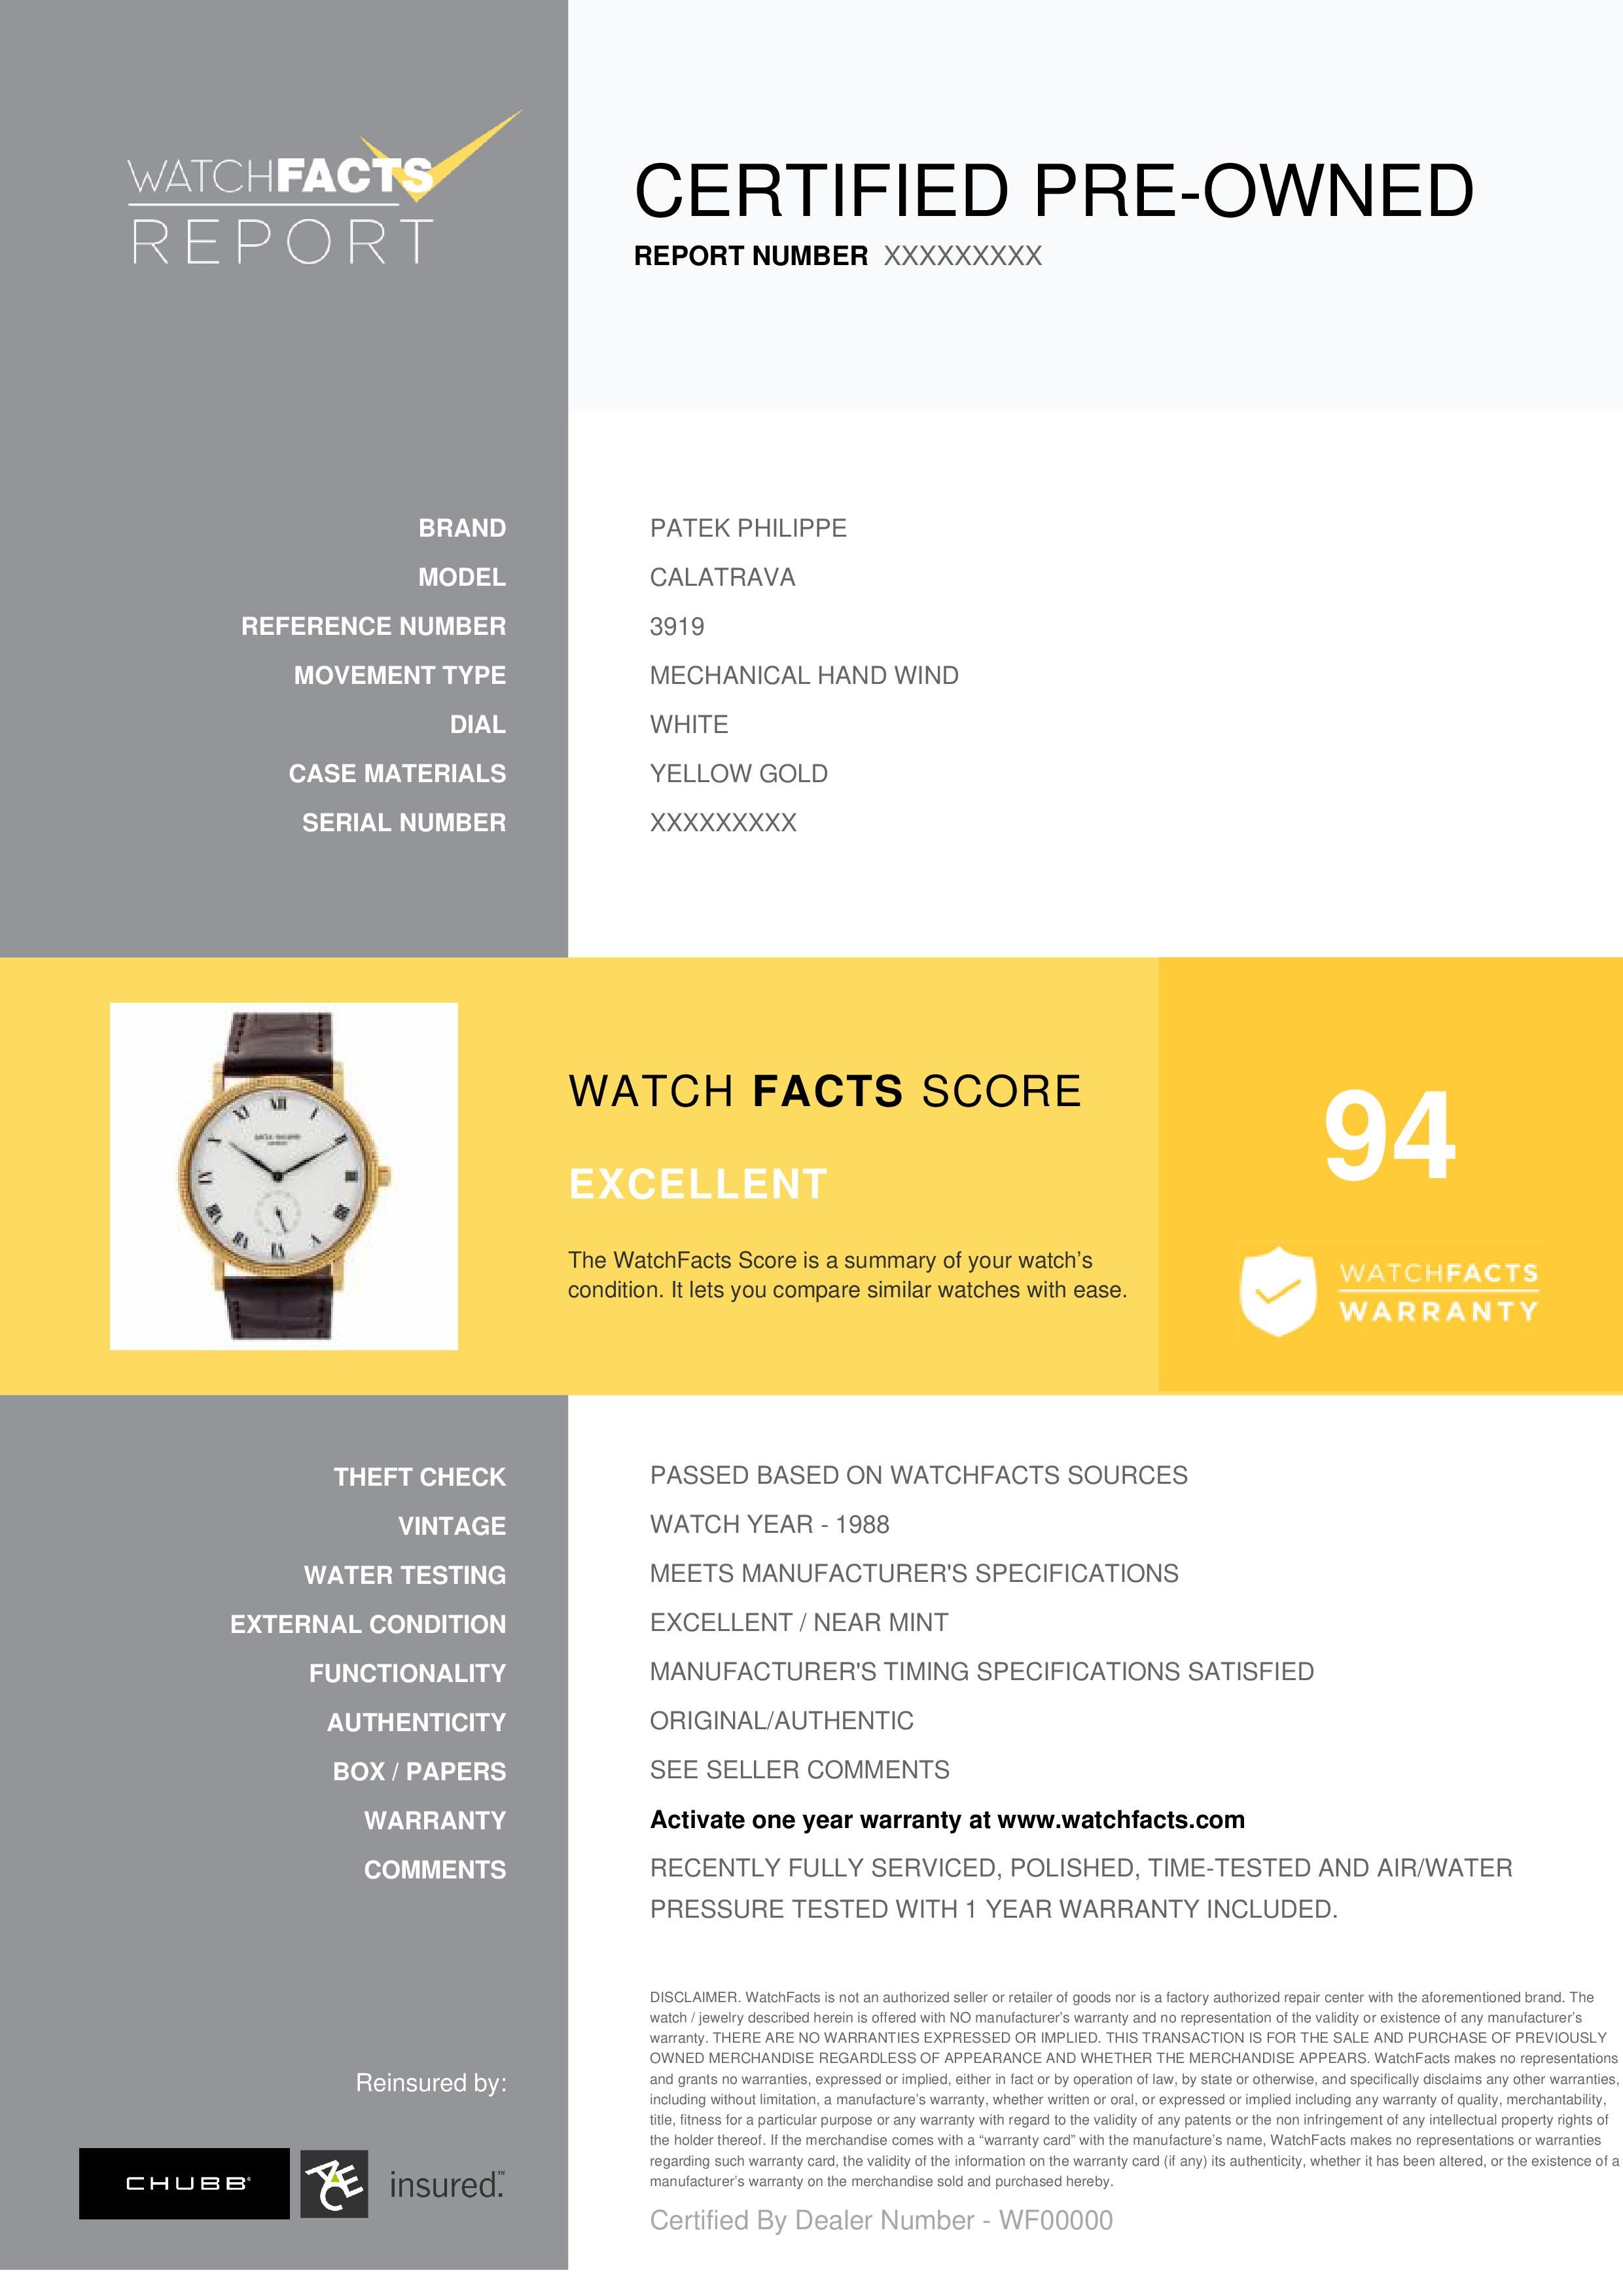 Patek Philippe Calatrava Reference #: 3919. Mens Mechanical Hand Wind Watch Yellow Gold White 33 MM. Verified and Certified by WatchFacts. 1 year warranty offered by WatchFacts.
